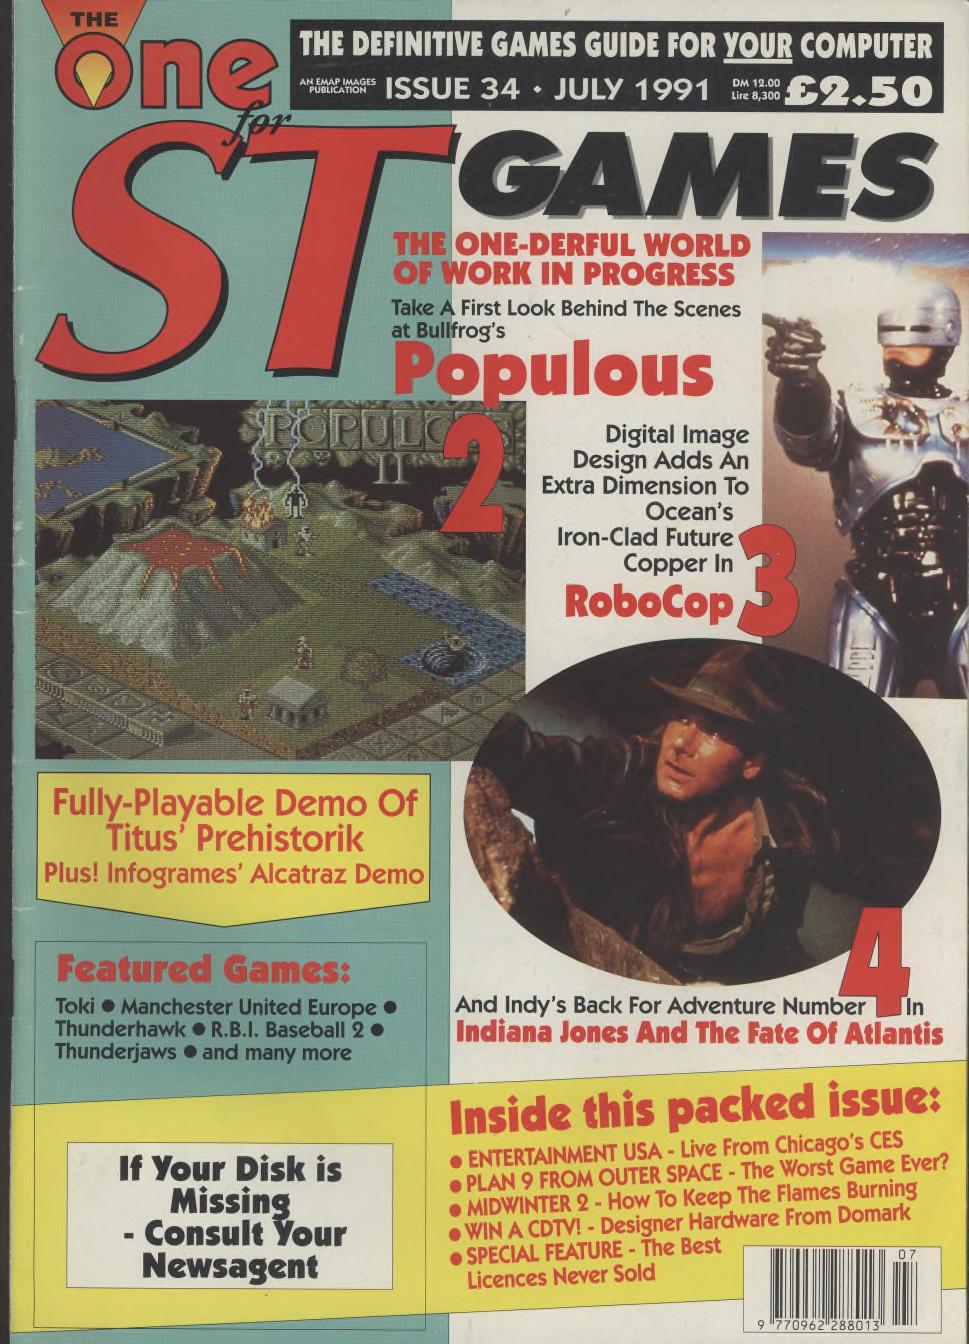 Cover for The One 34 (Jul 1991)